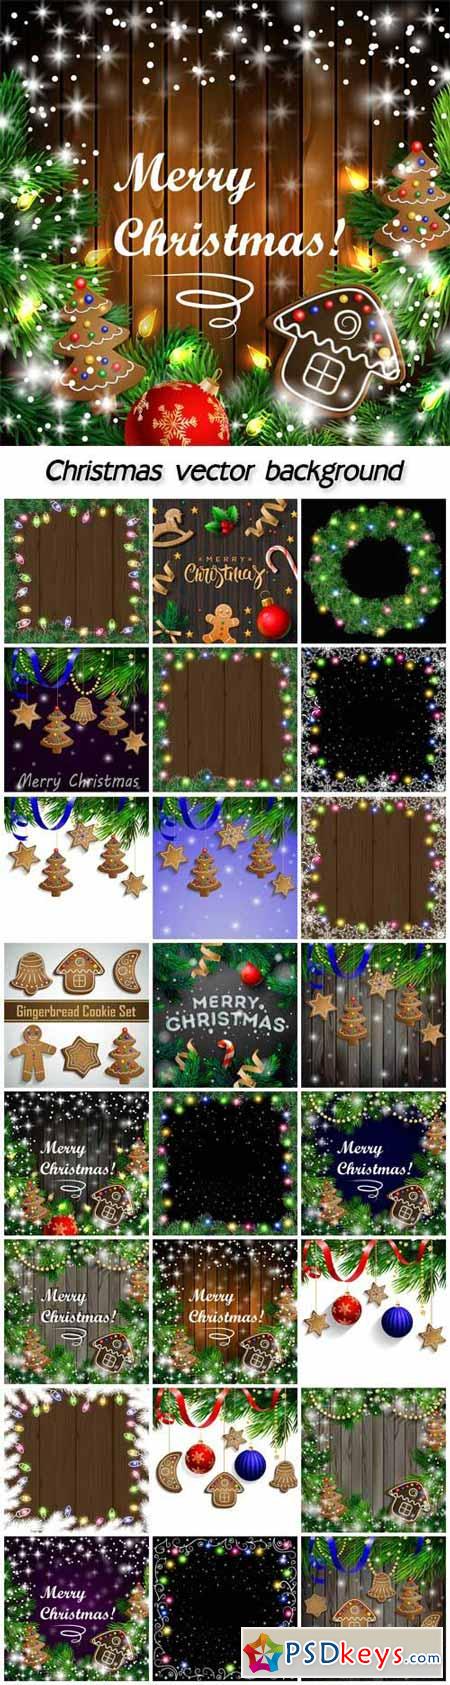 Christmas design with gingerbread cookies, shimmering bauble, shining tree